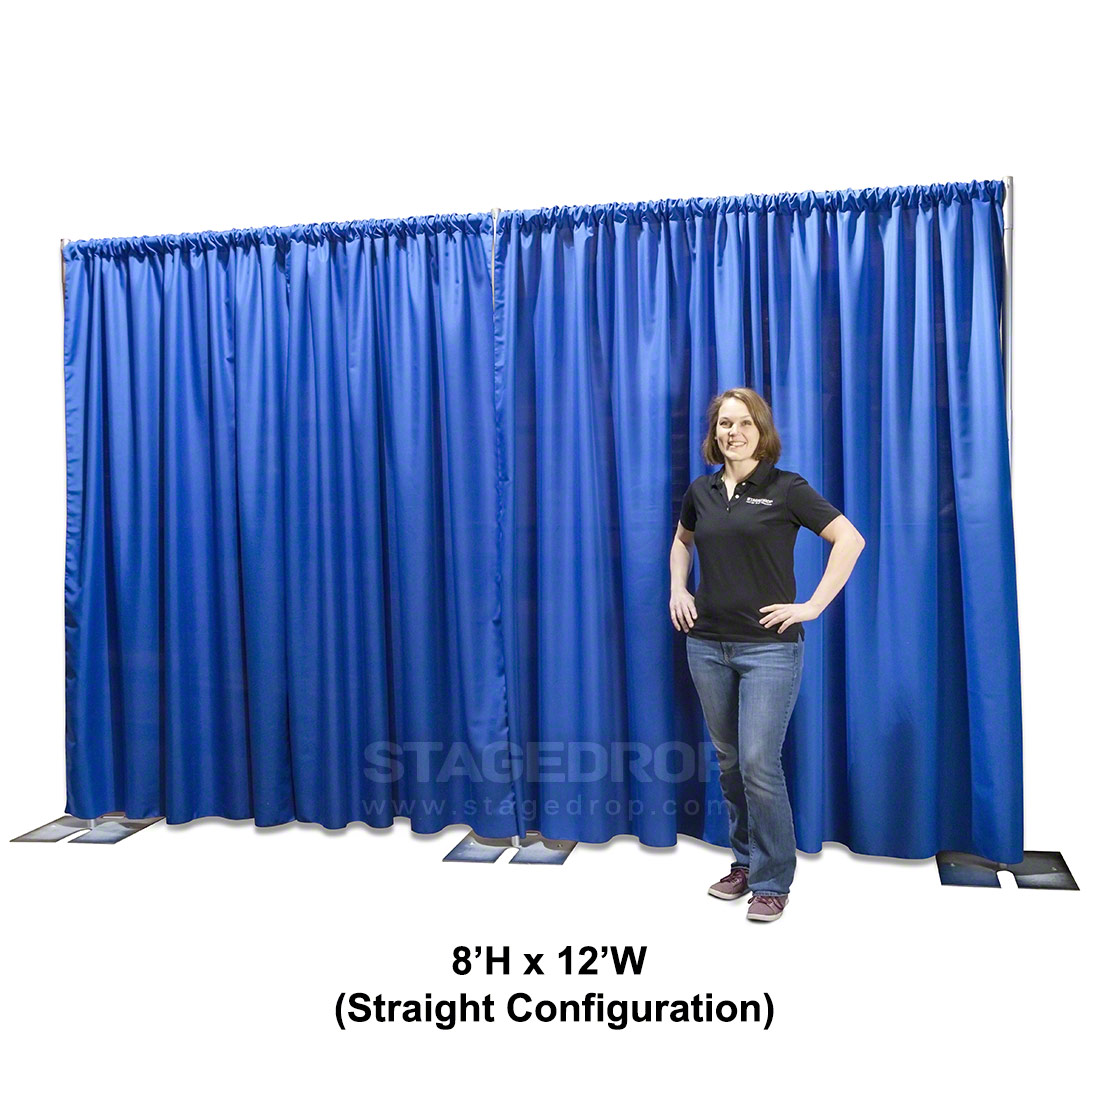 9 H x 20 W Non-FR Red Curtain/Stage Backdrop/Partition 